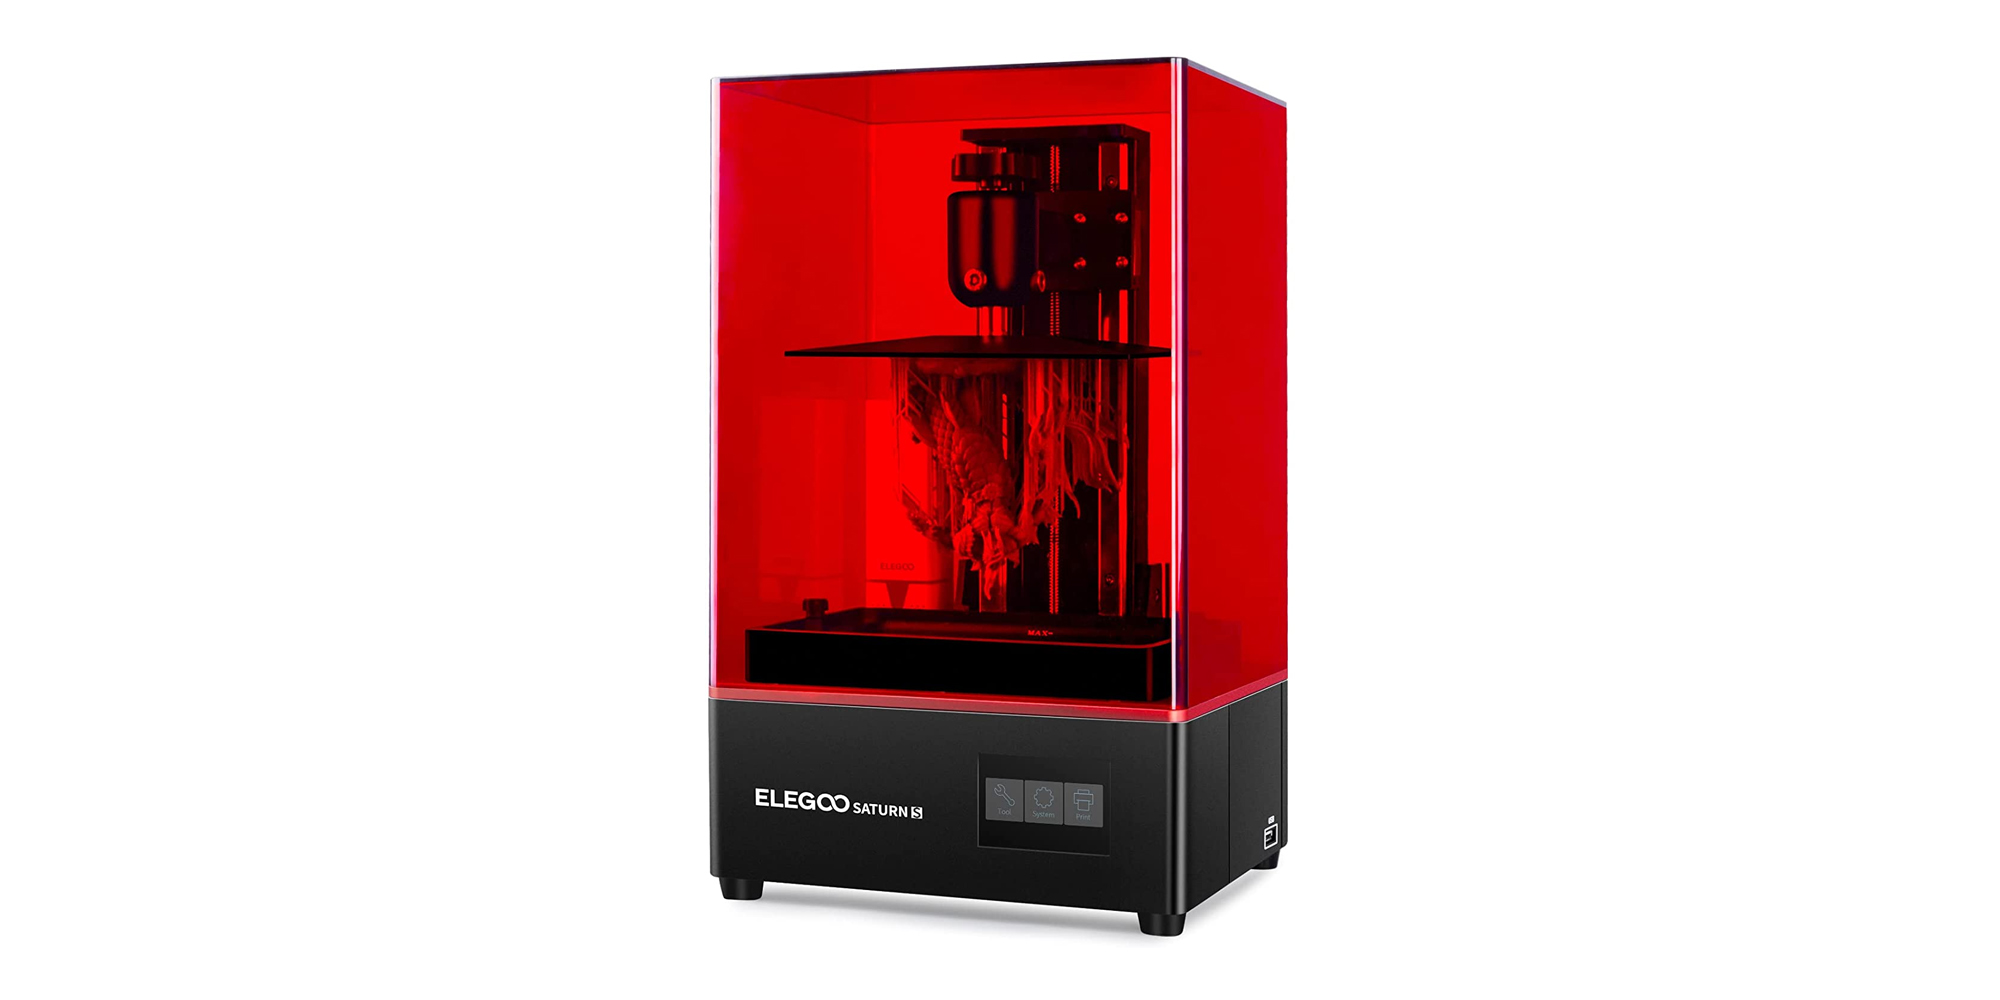 ELEGOO's latest Saturn S Resin 3D Printer reaches new low price at $475  (Save 21%)